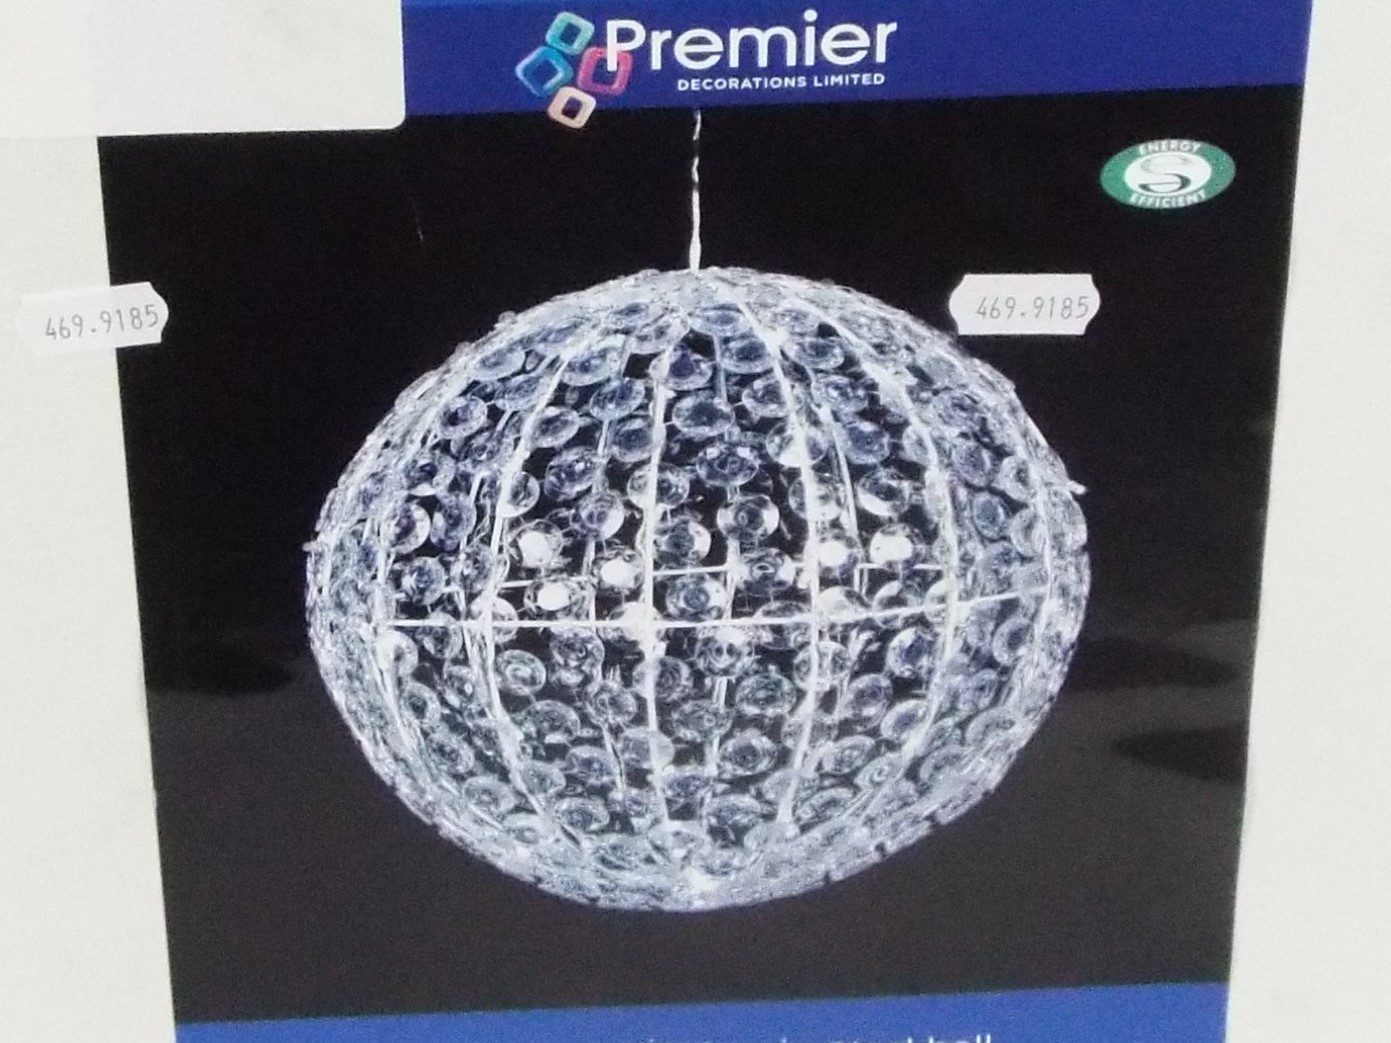 A boxed 30 cm white LED twinkling ball.